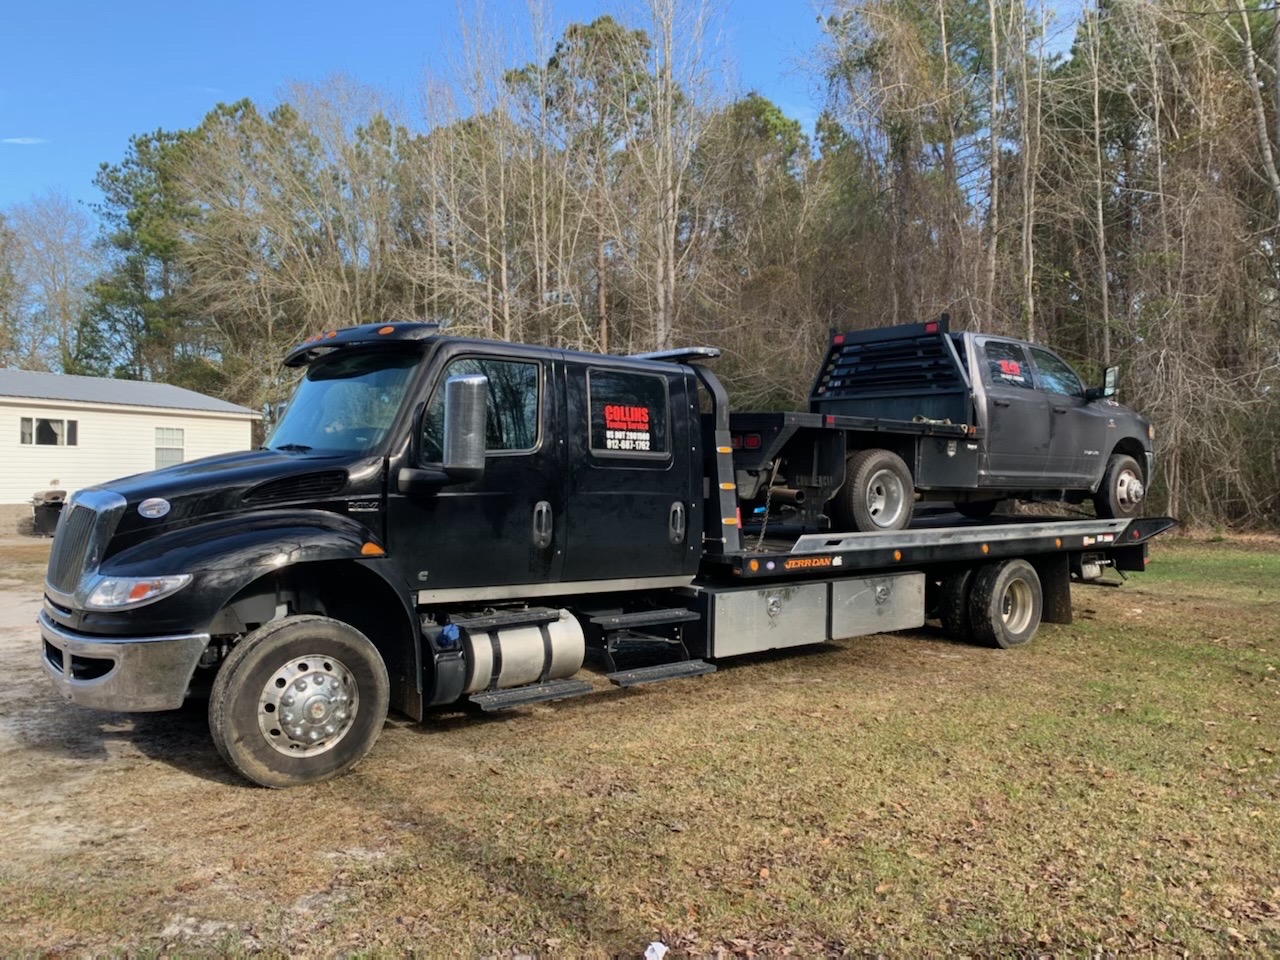 Statesboro Tow Truck | Roadside Assistance | Asset Recovery | Collins Towing